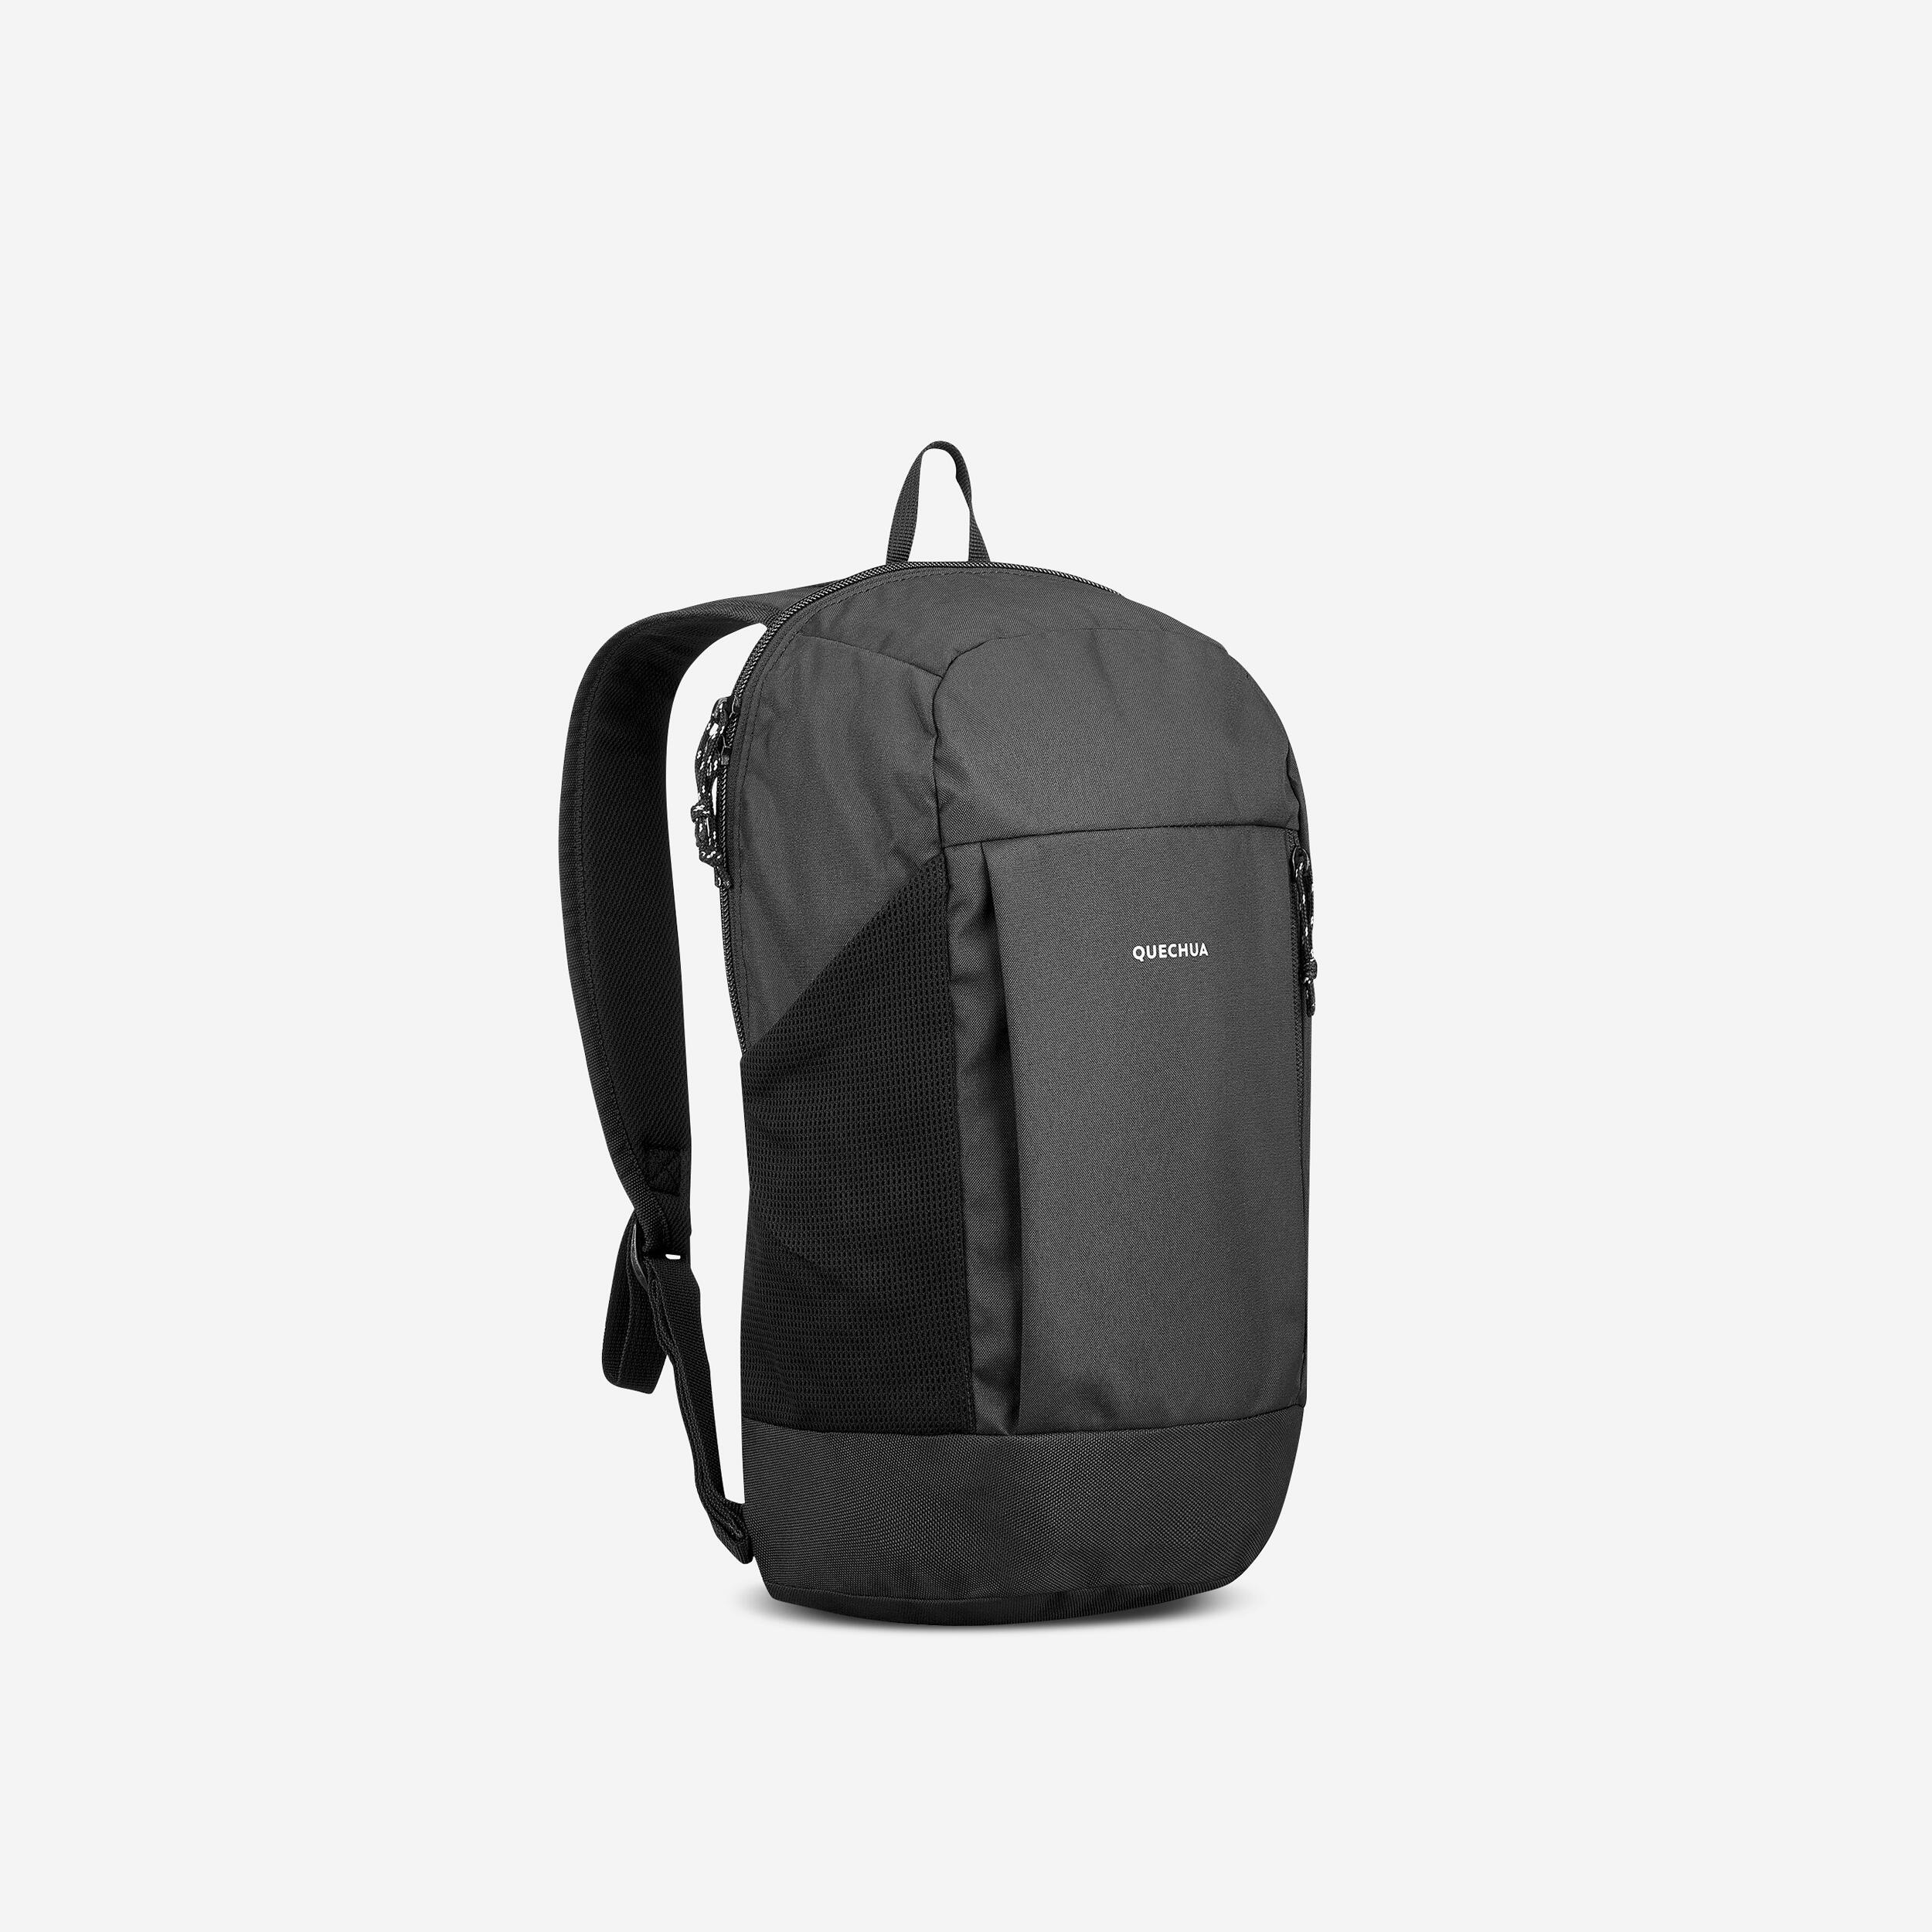 10 L Hiking Backpack - NH Arpenaz 100 - smoked black - Quechua - Decathlon